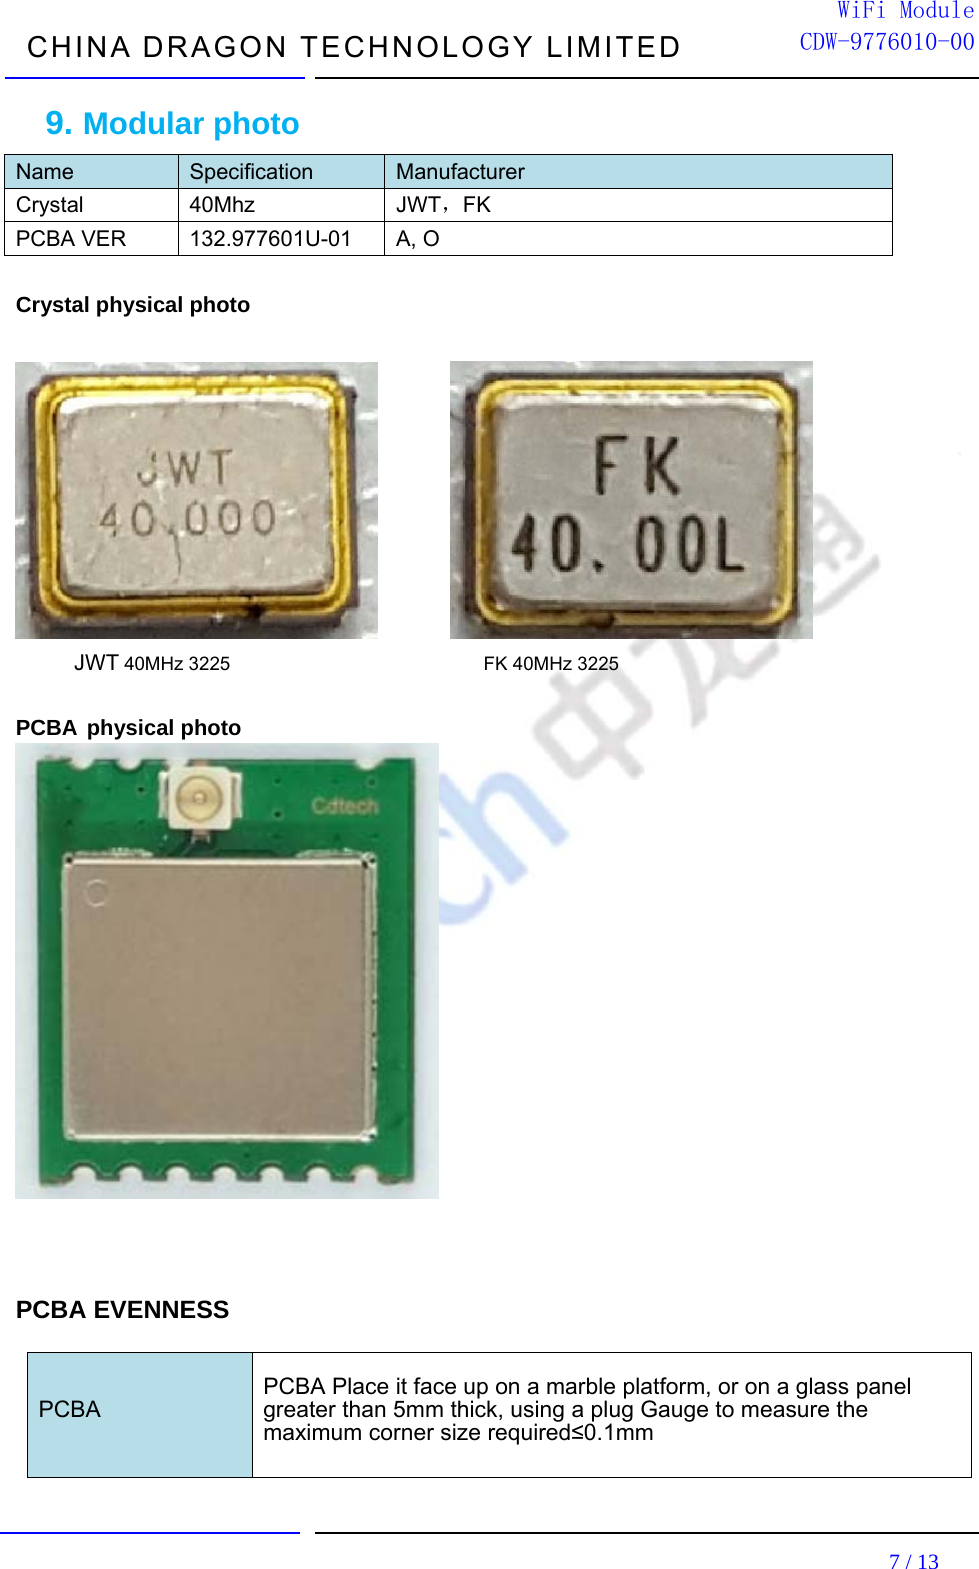  CHINA DRAGON TECHNOLOGY LIMITED                                                                         7 / 13  WiFi ModuleCDW-9776010-009. Modular photo Name  Specification  Manufacturer Crystal 40Mhz  JWT，FK PCBA VER  132.977601U-01  A, O  Crystal physical photo             JWT 40MHz 3225                           FK 40MHz 3225  PCBA physical photo                 PCBA EVENNESS    PCBA    PCBA Place it face up on a marble platform, or on a glass panel   greater than 5mm thick, using a plug Gauge to measure the maximum corner size required≤0.1mm     